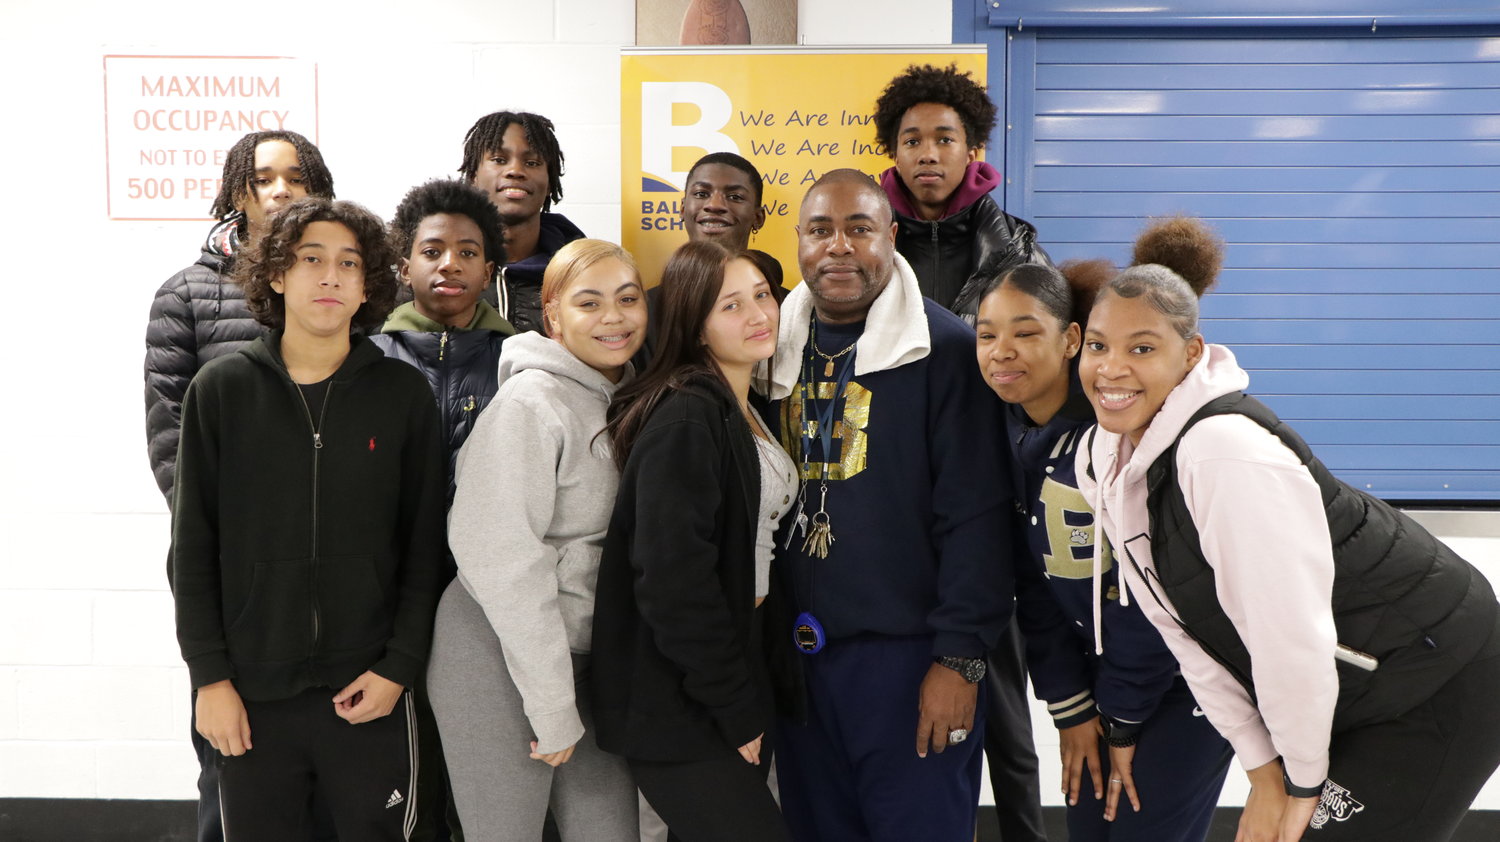 The Baldwin High School hosted the annual Mentoring Breakfast — a Baldwin tradition, where a total of 180 mentors and mentees from grades 9-12 gather to celebrate the program in January